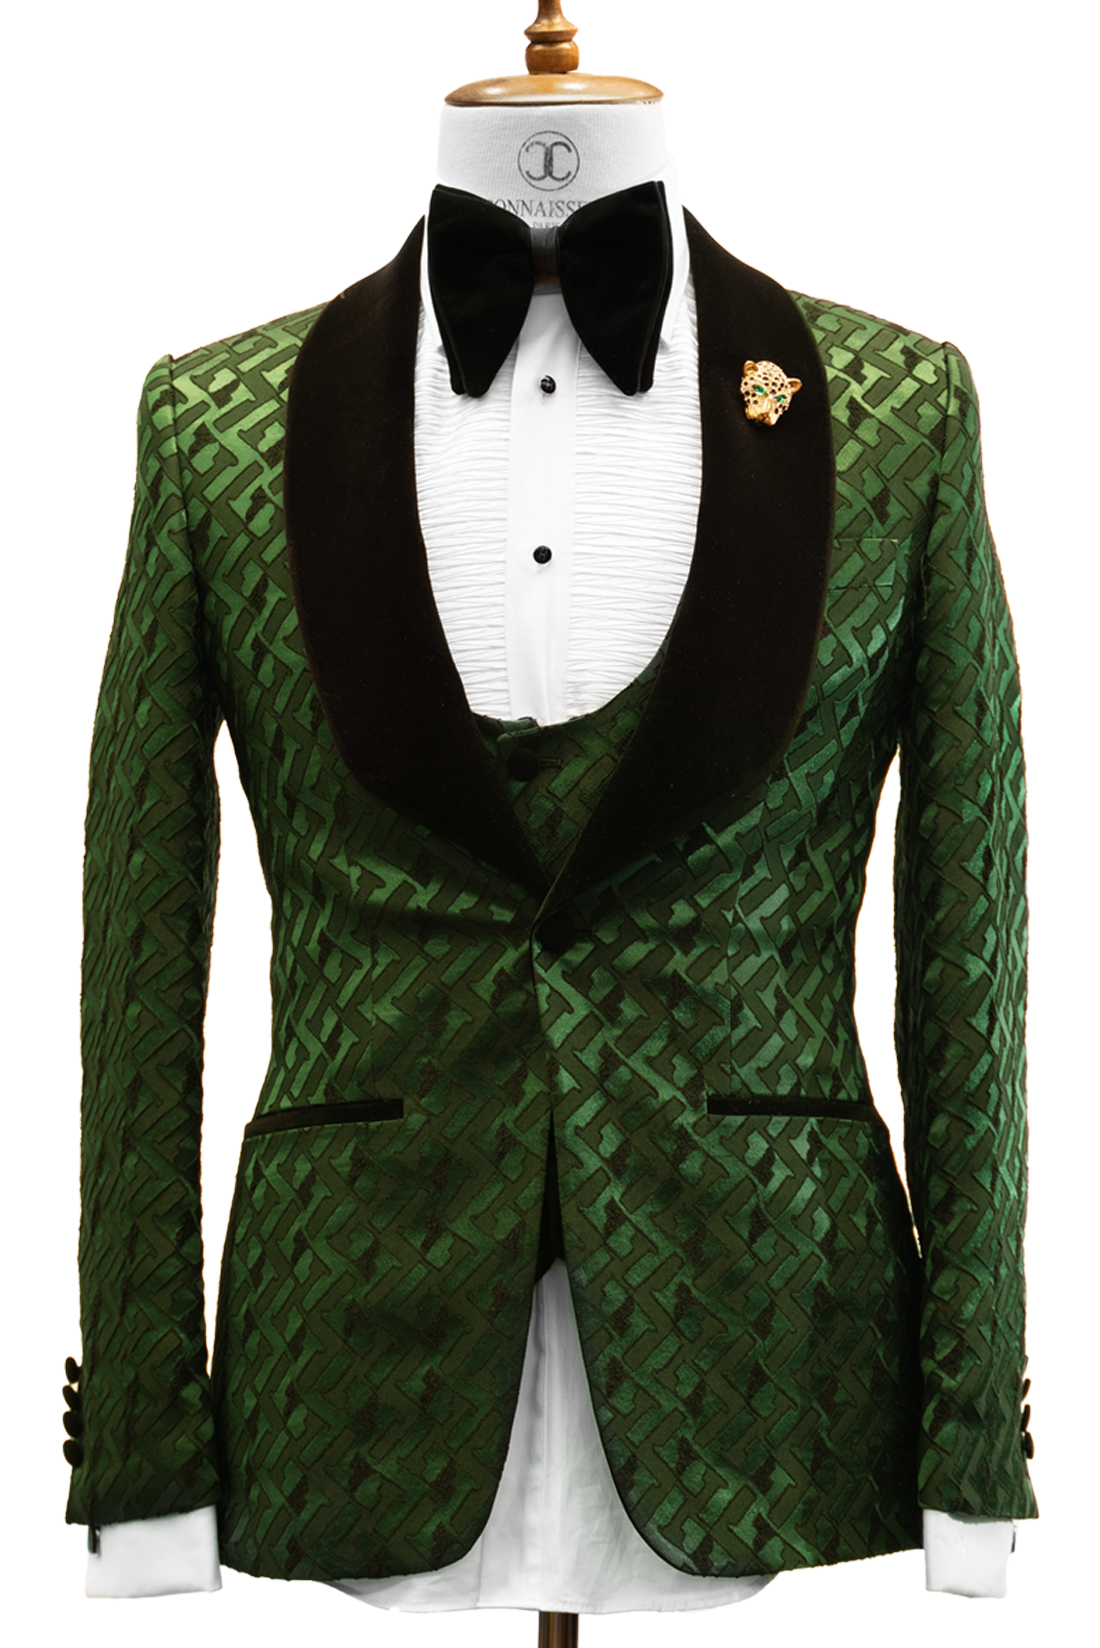 CONNAISSEUR - FOREST GREEN WITH H PATTERN 3-PIECE SLIM FIT TUXEDO WITH U VEST